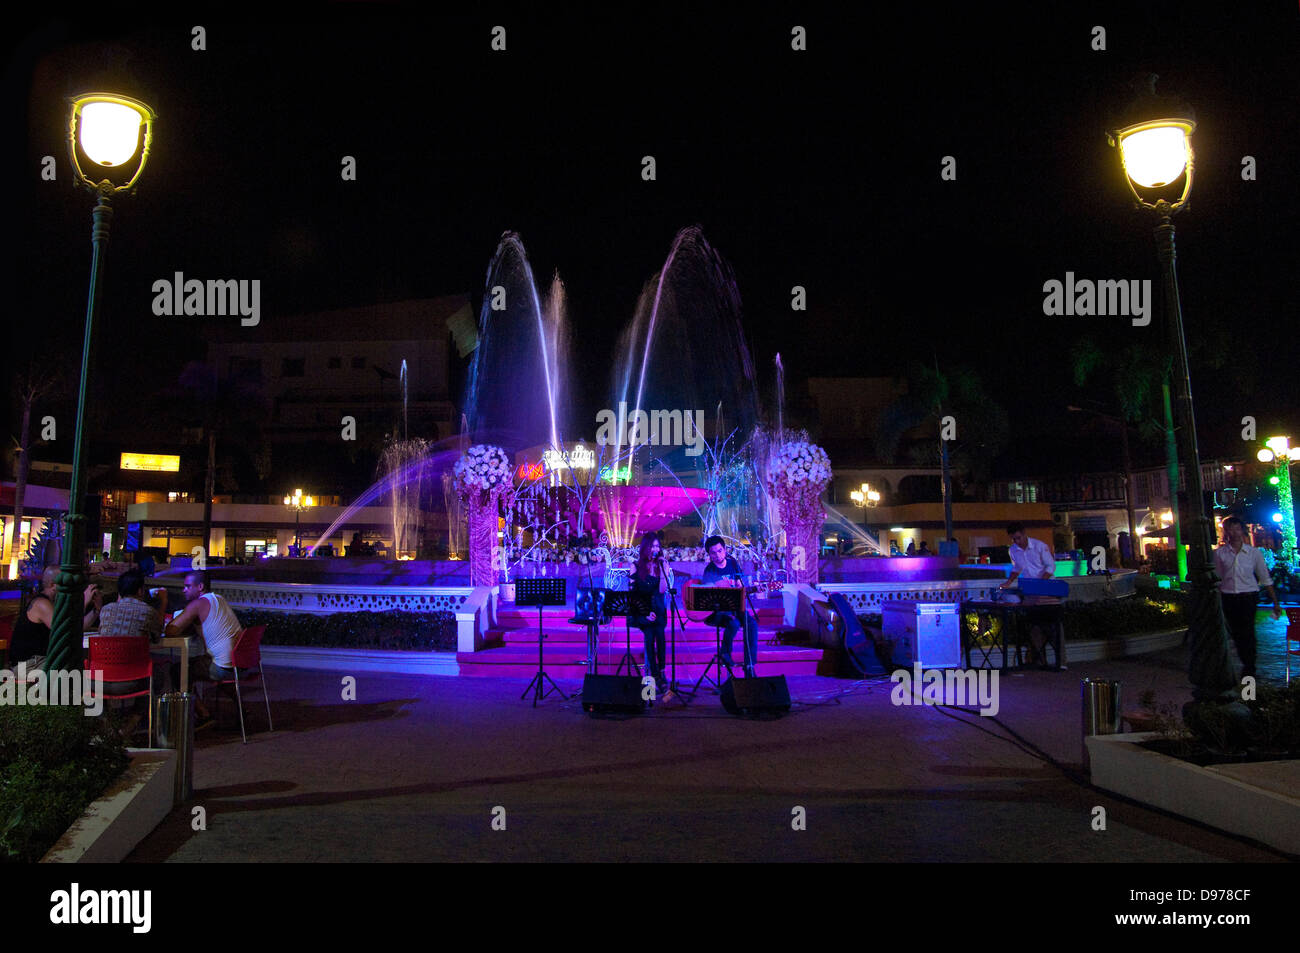 Horizontal view of a duet performing infront of the illuminated Nam Phou fountain in Vientiane at night. Stock Photo